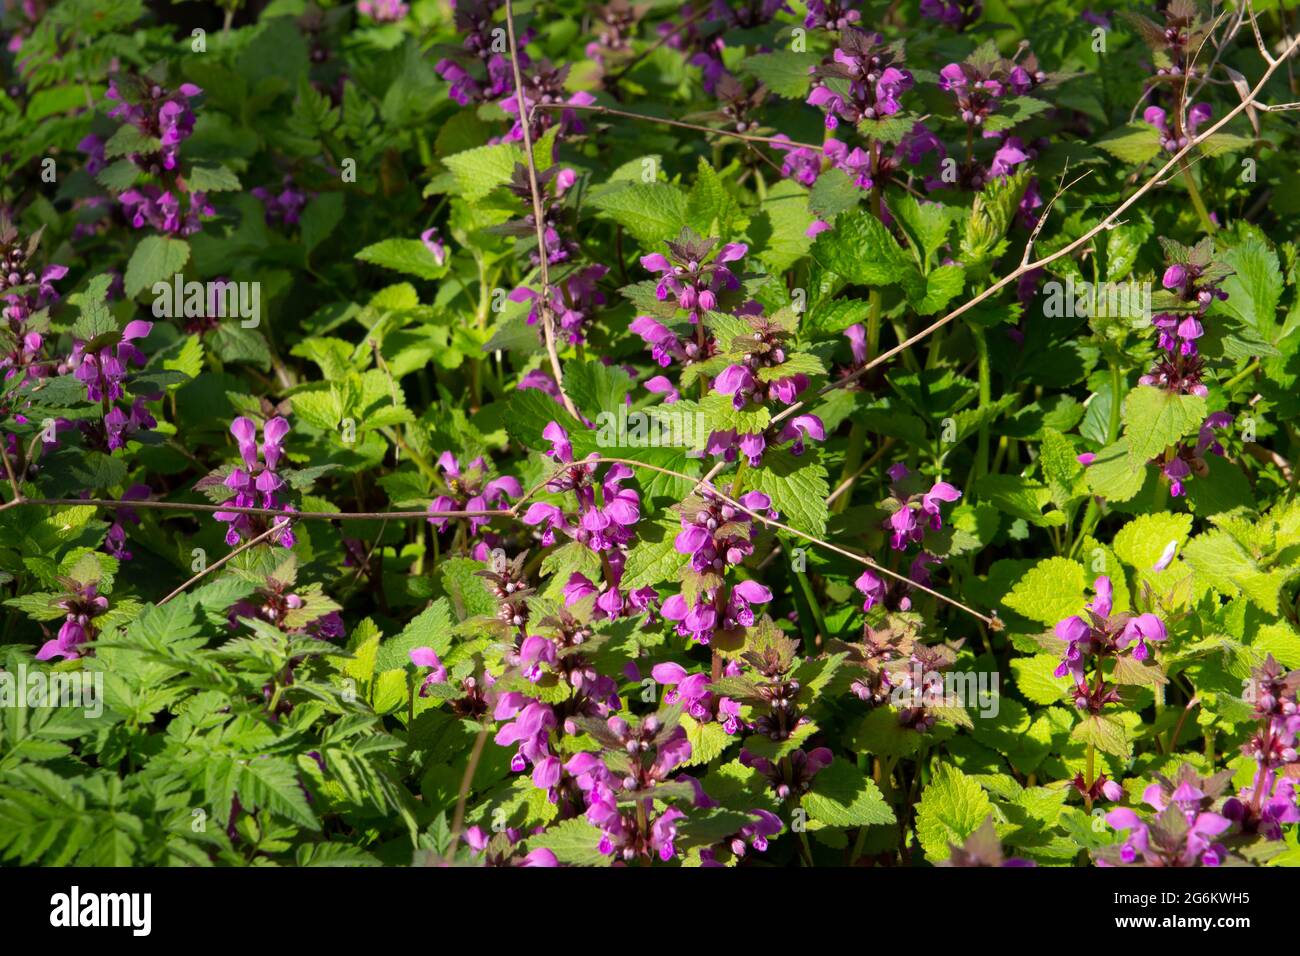 Pink flowers of dead nettle, also called Lamium maculatum Stock Photo